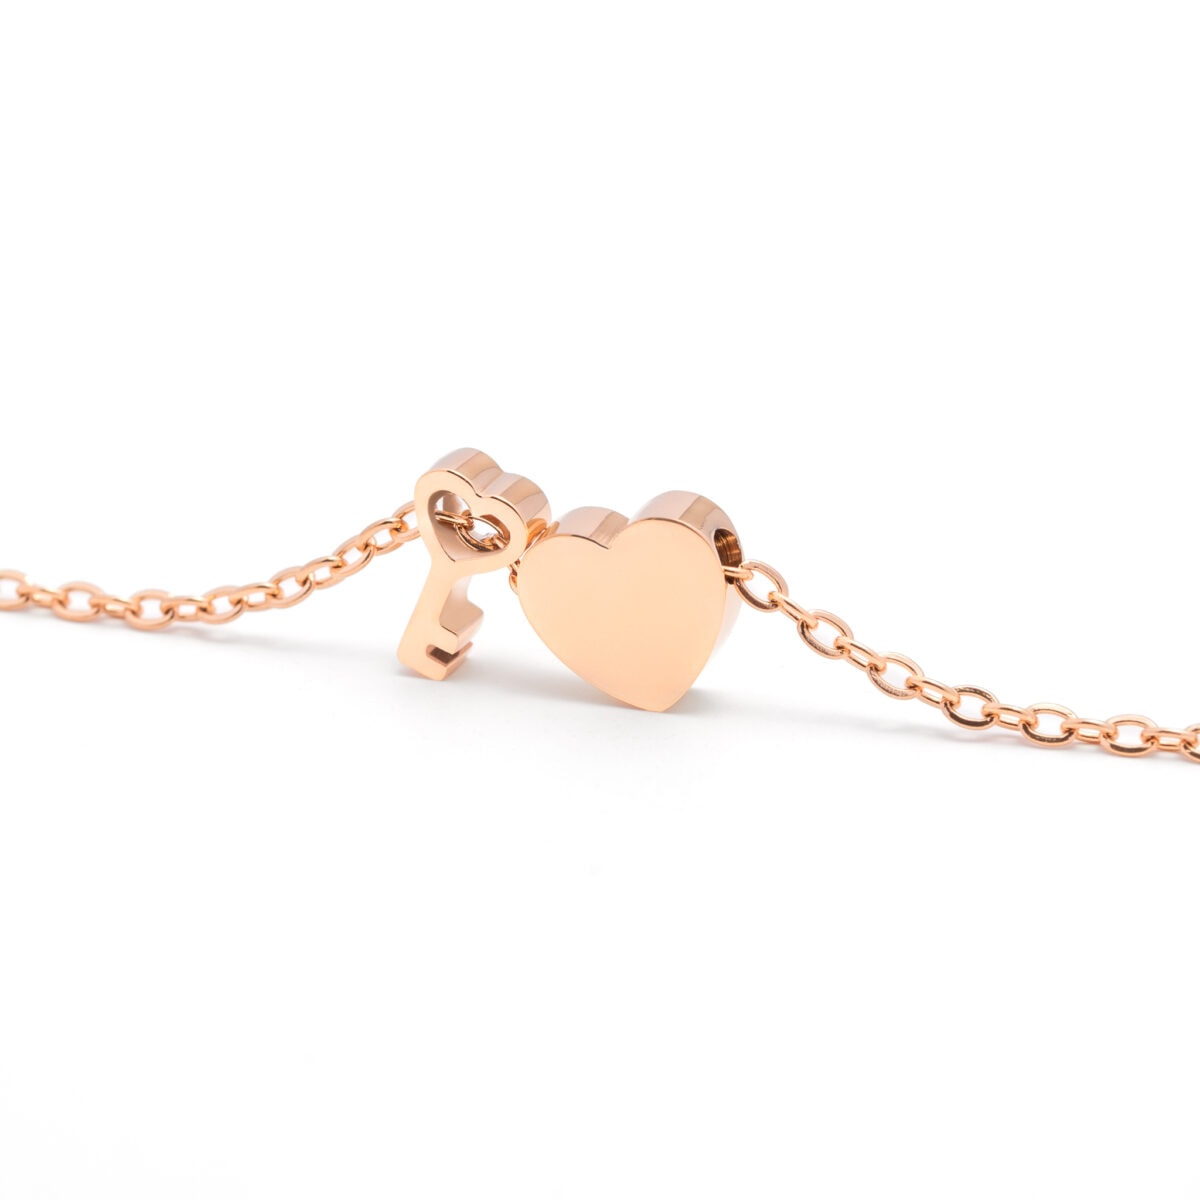 https://m.clubbella.co/product/key-to-thee-heart-rose-gold-charm-necklace/ Key to Thee Rose Gold (1)